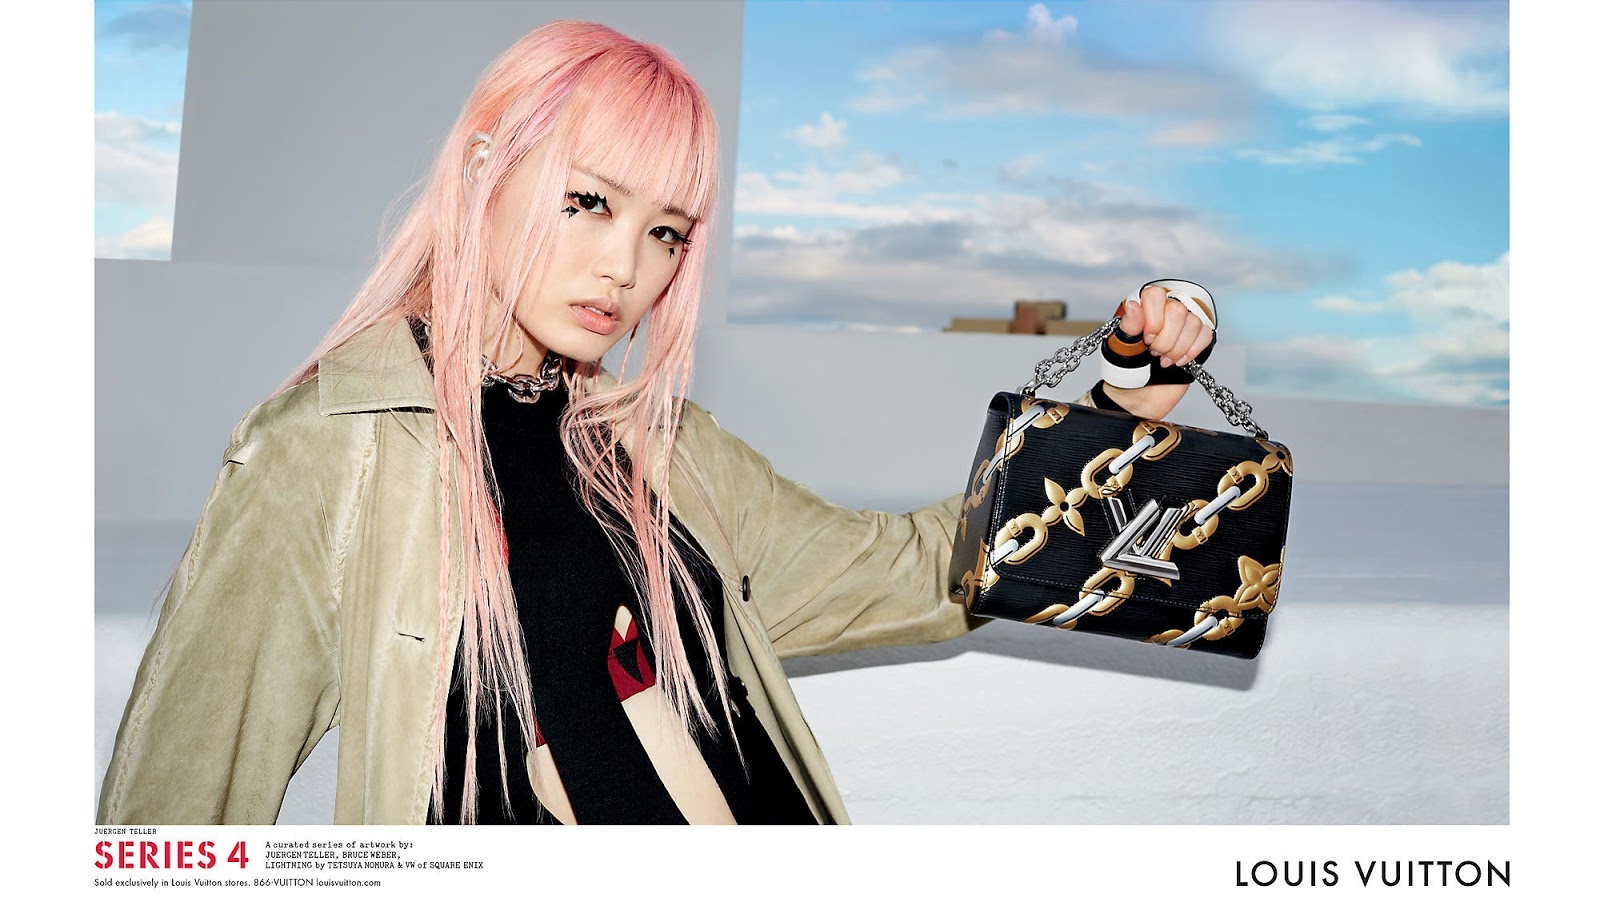 ASIAN MODELS BLOG: AD CAMPAIGN: Fernanda Ly for Louis Vuitton, Spring/Summer 2016